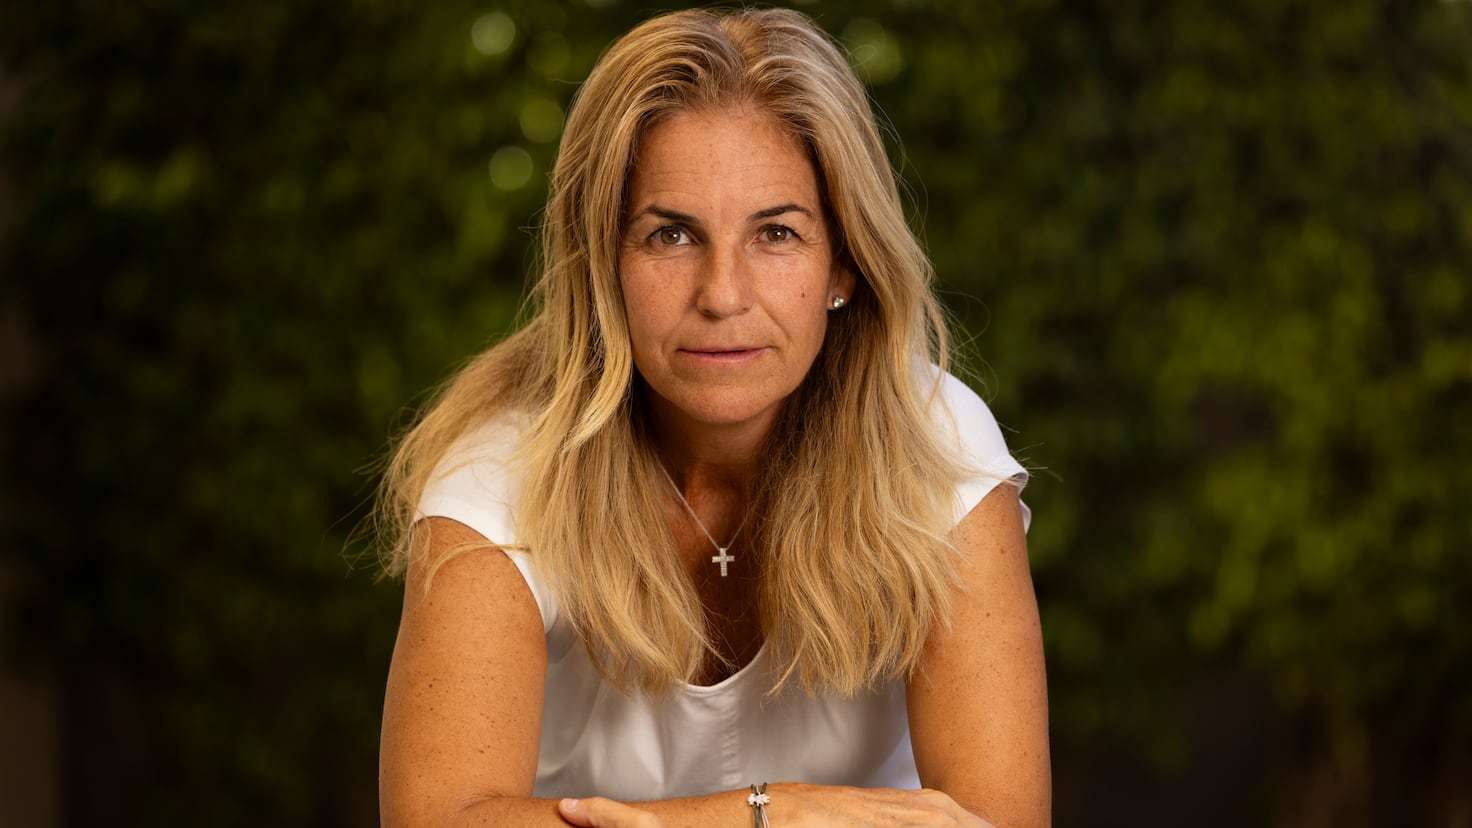 Arantxa Snchez Vicario: I have drawn inner strength from my journey into the depths